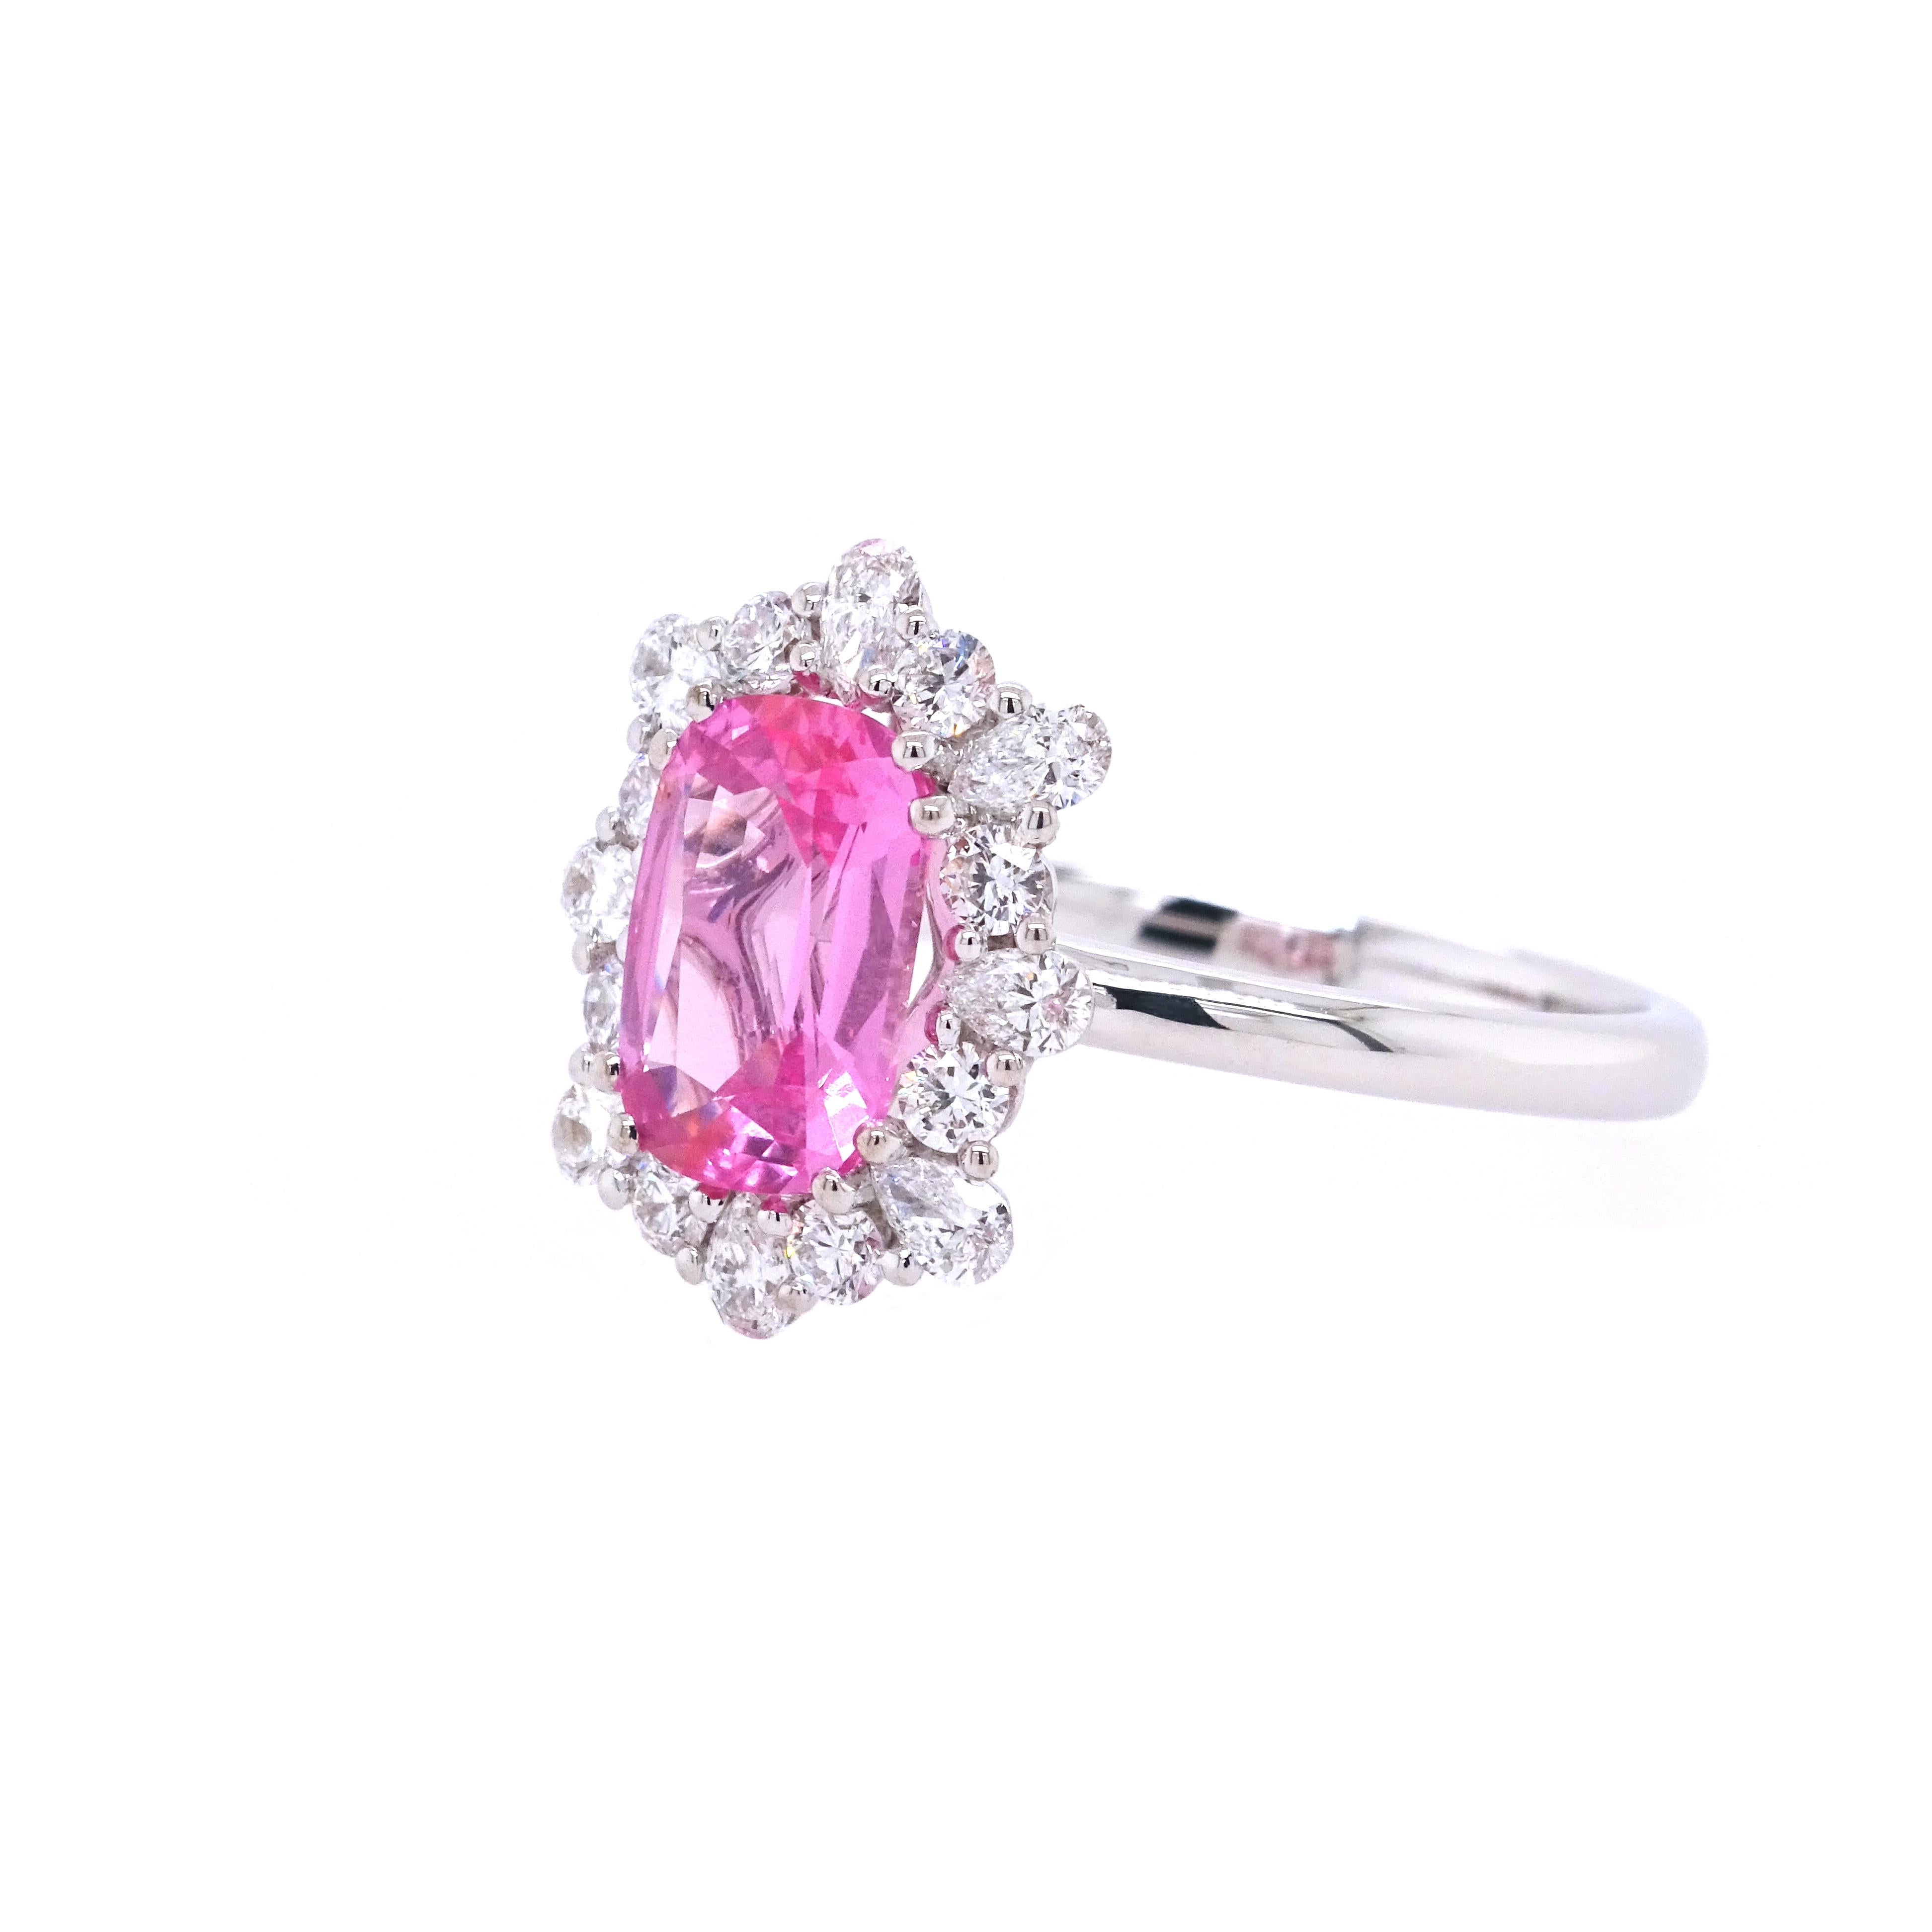 Introducing our exclusive and exquisite creation, a masterpiece born from collaboration with master gem cutter Alex Goncharoff. At its heart lies an unheated natural pink modified step-cut spinel sourced from Tanzania, exuding unparalleled beauty